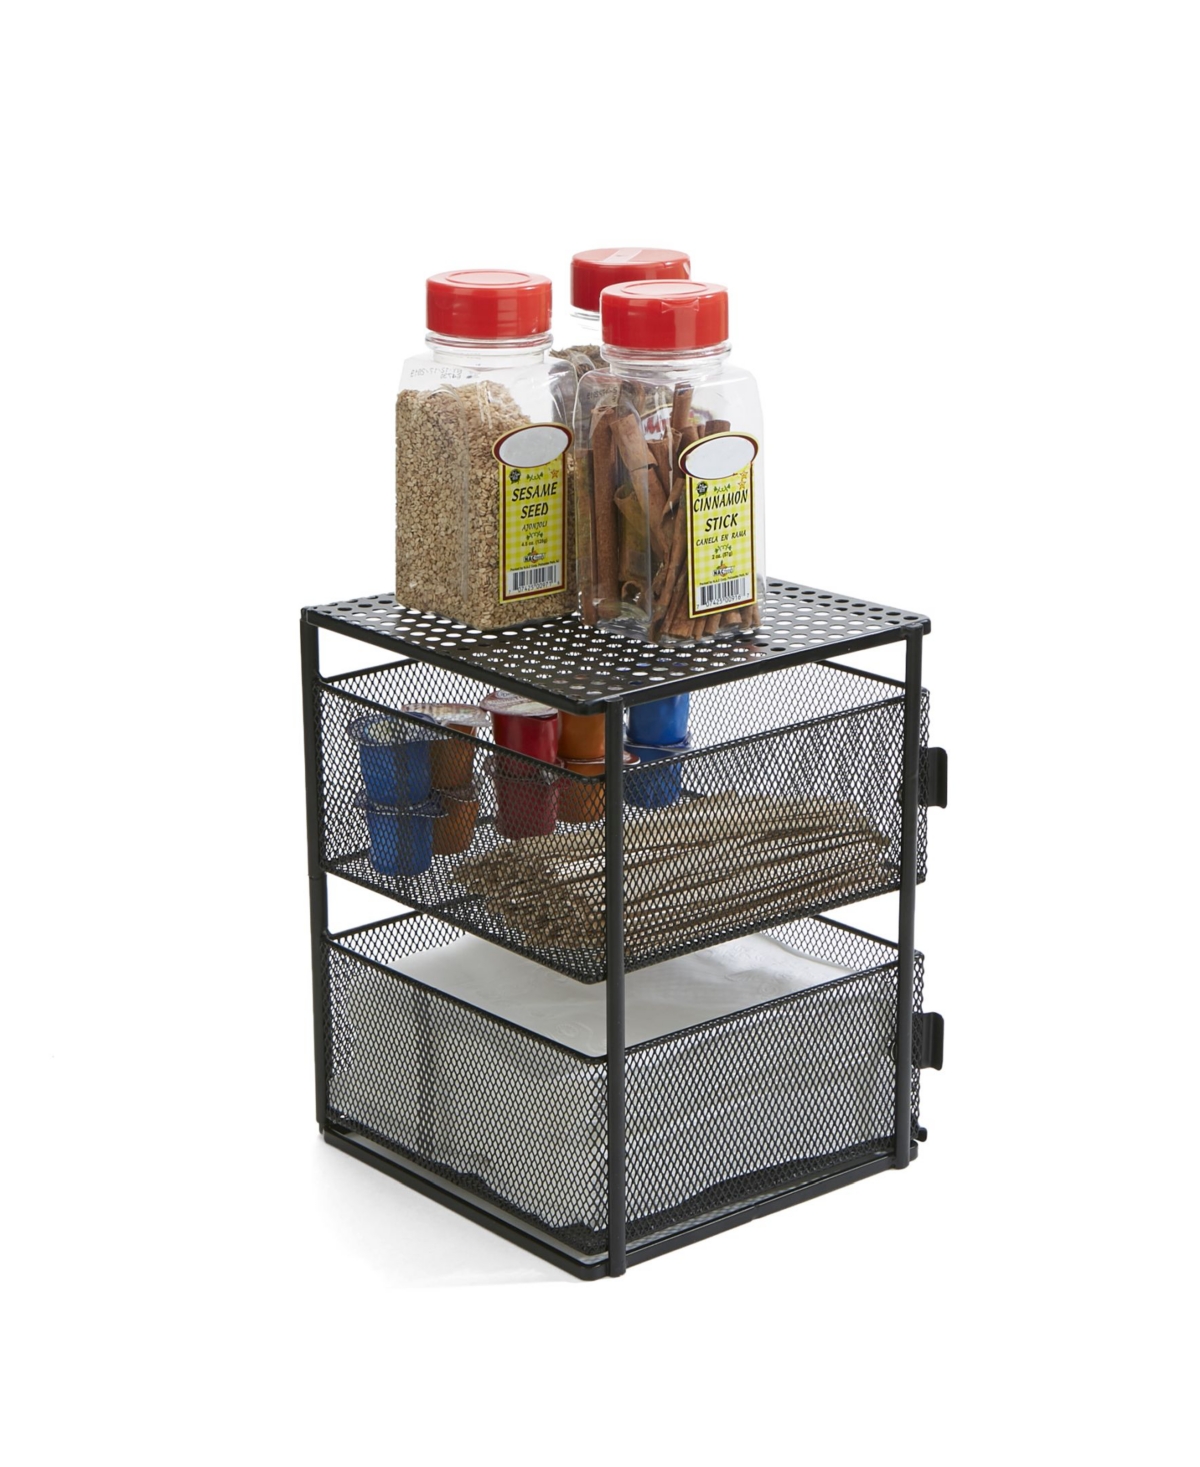 Rotating All Purpose 2 Tier Shelf, Baskets, Drawers with Magnets - Black